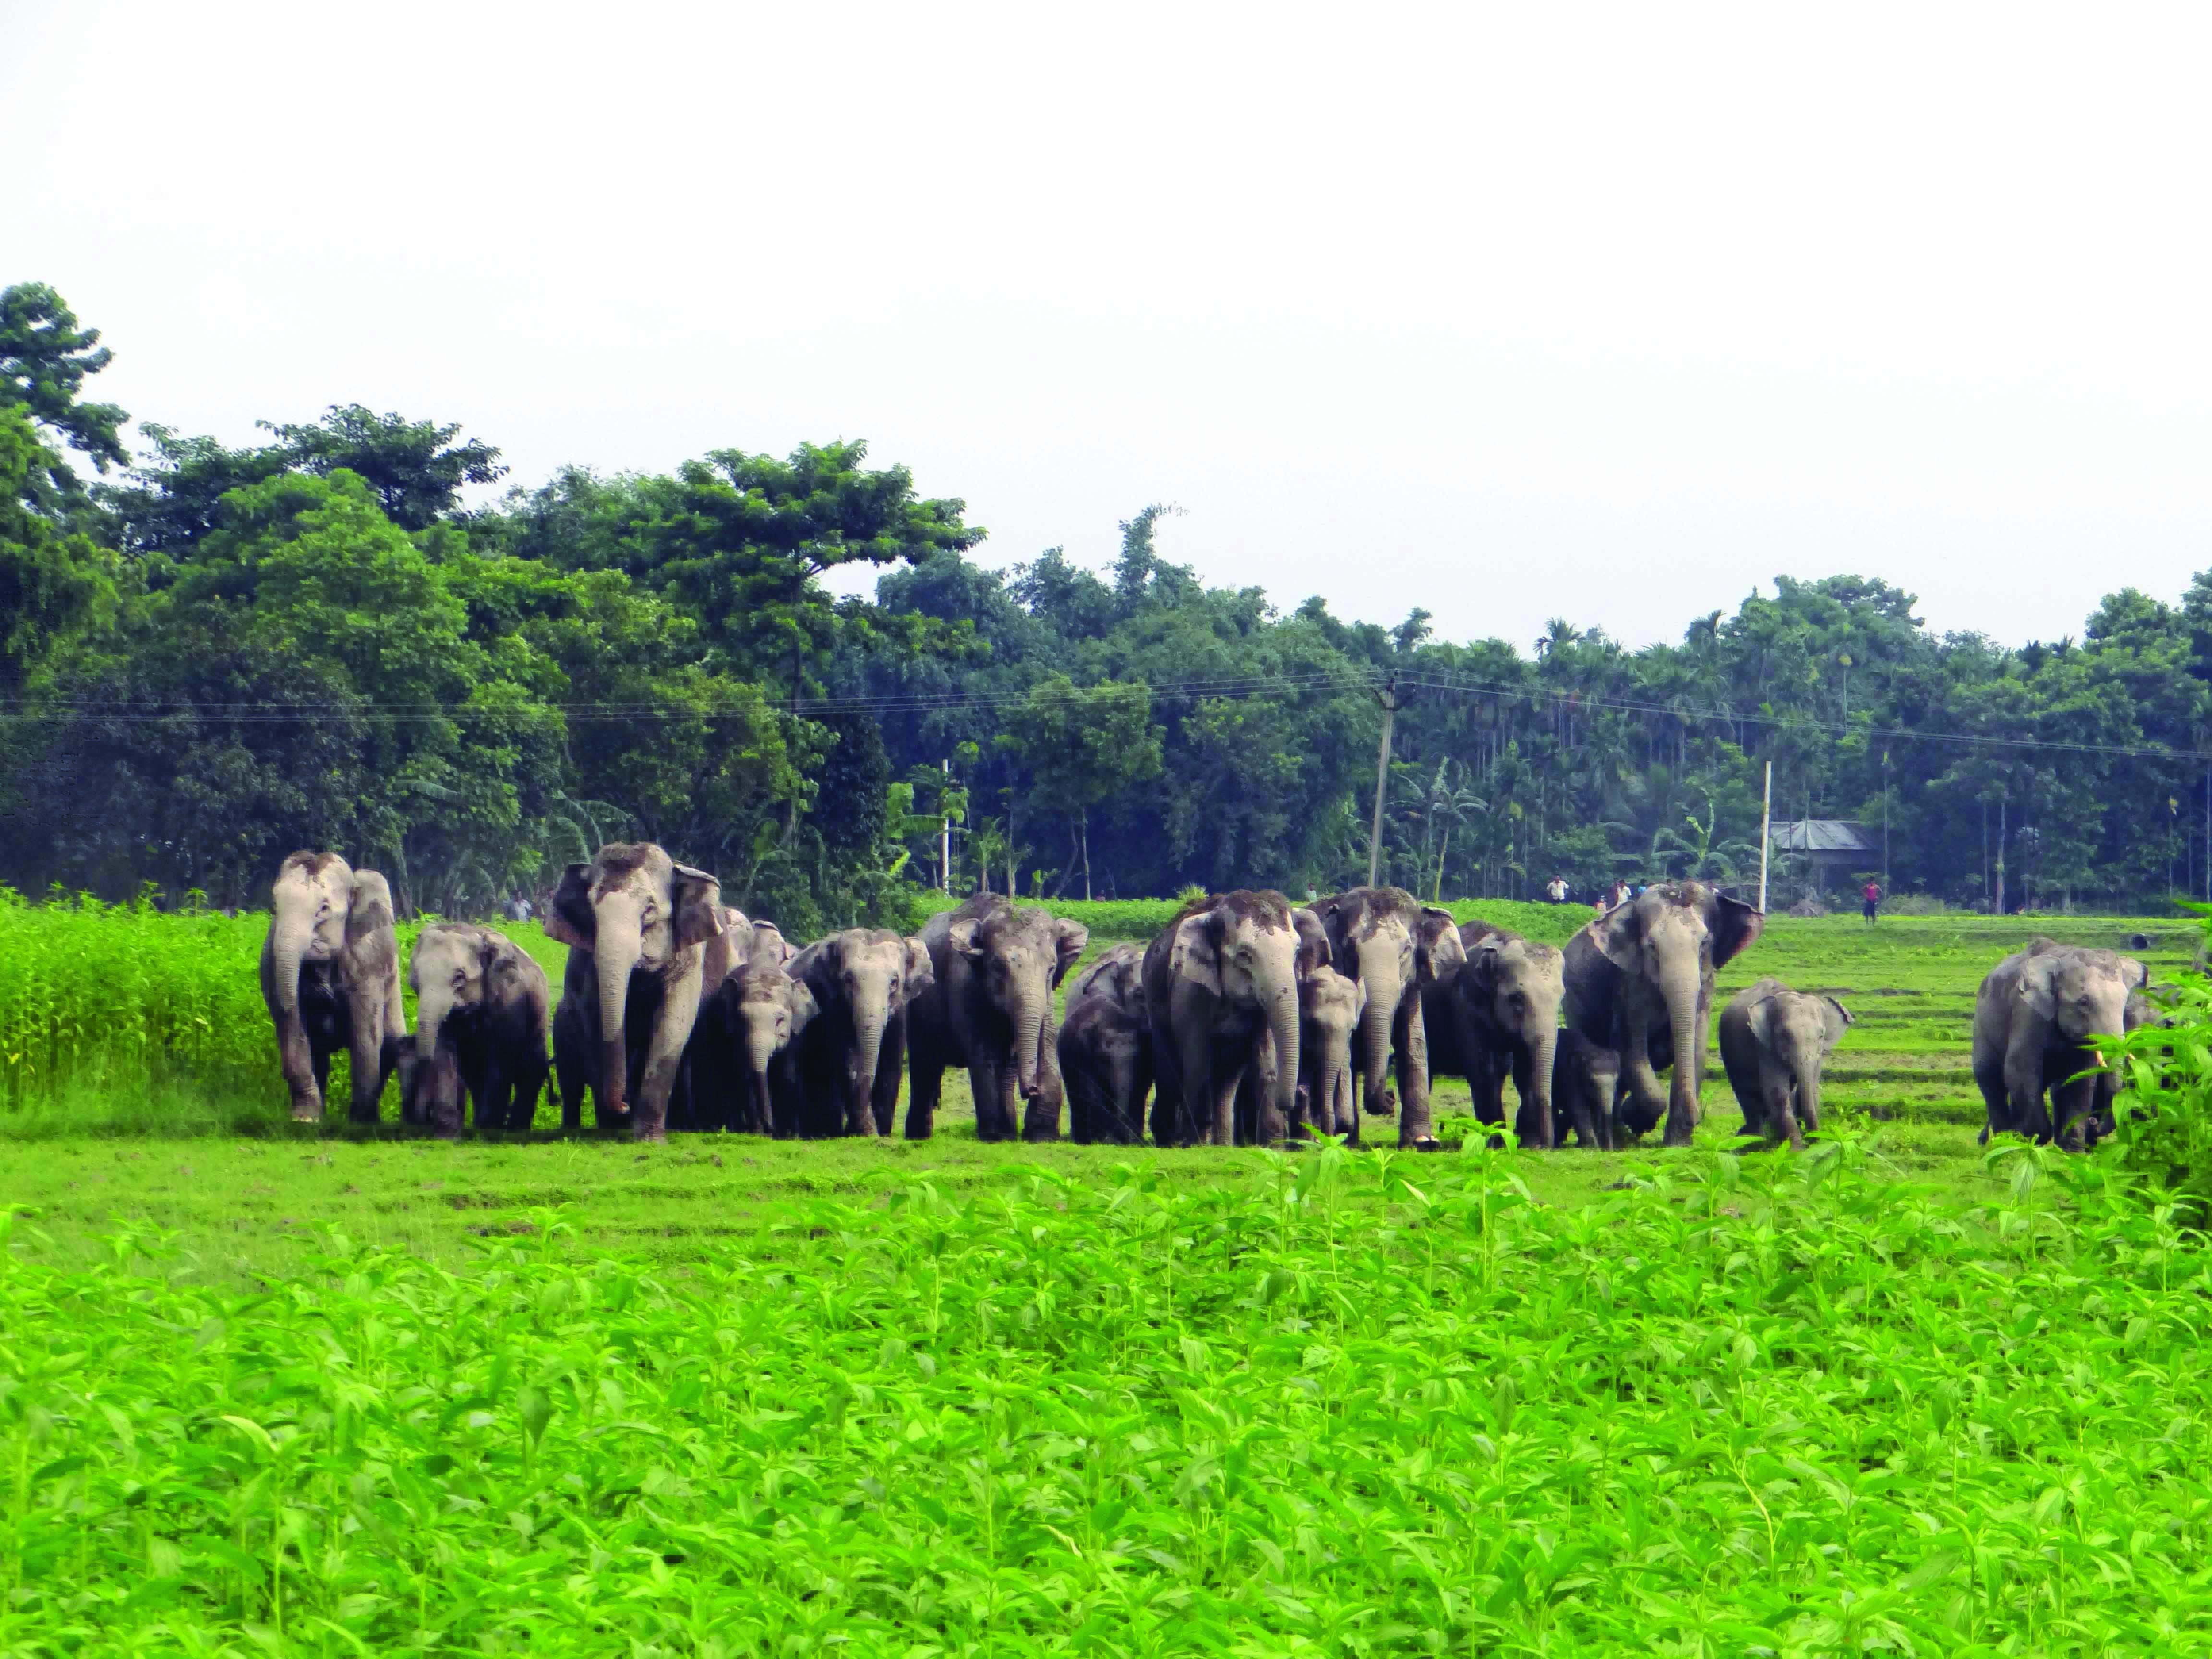 Man-animal conflict: Forest dept pushes to spread awareness